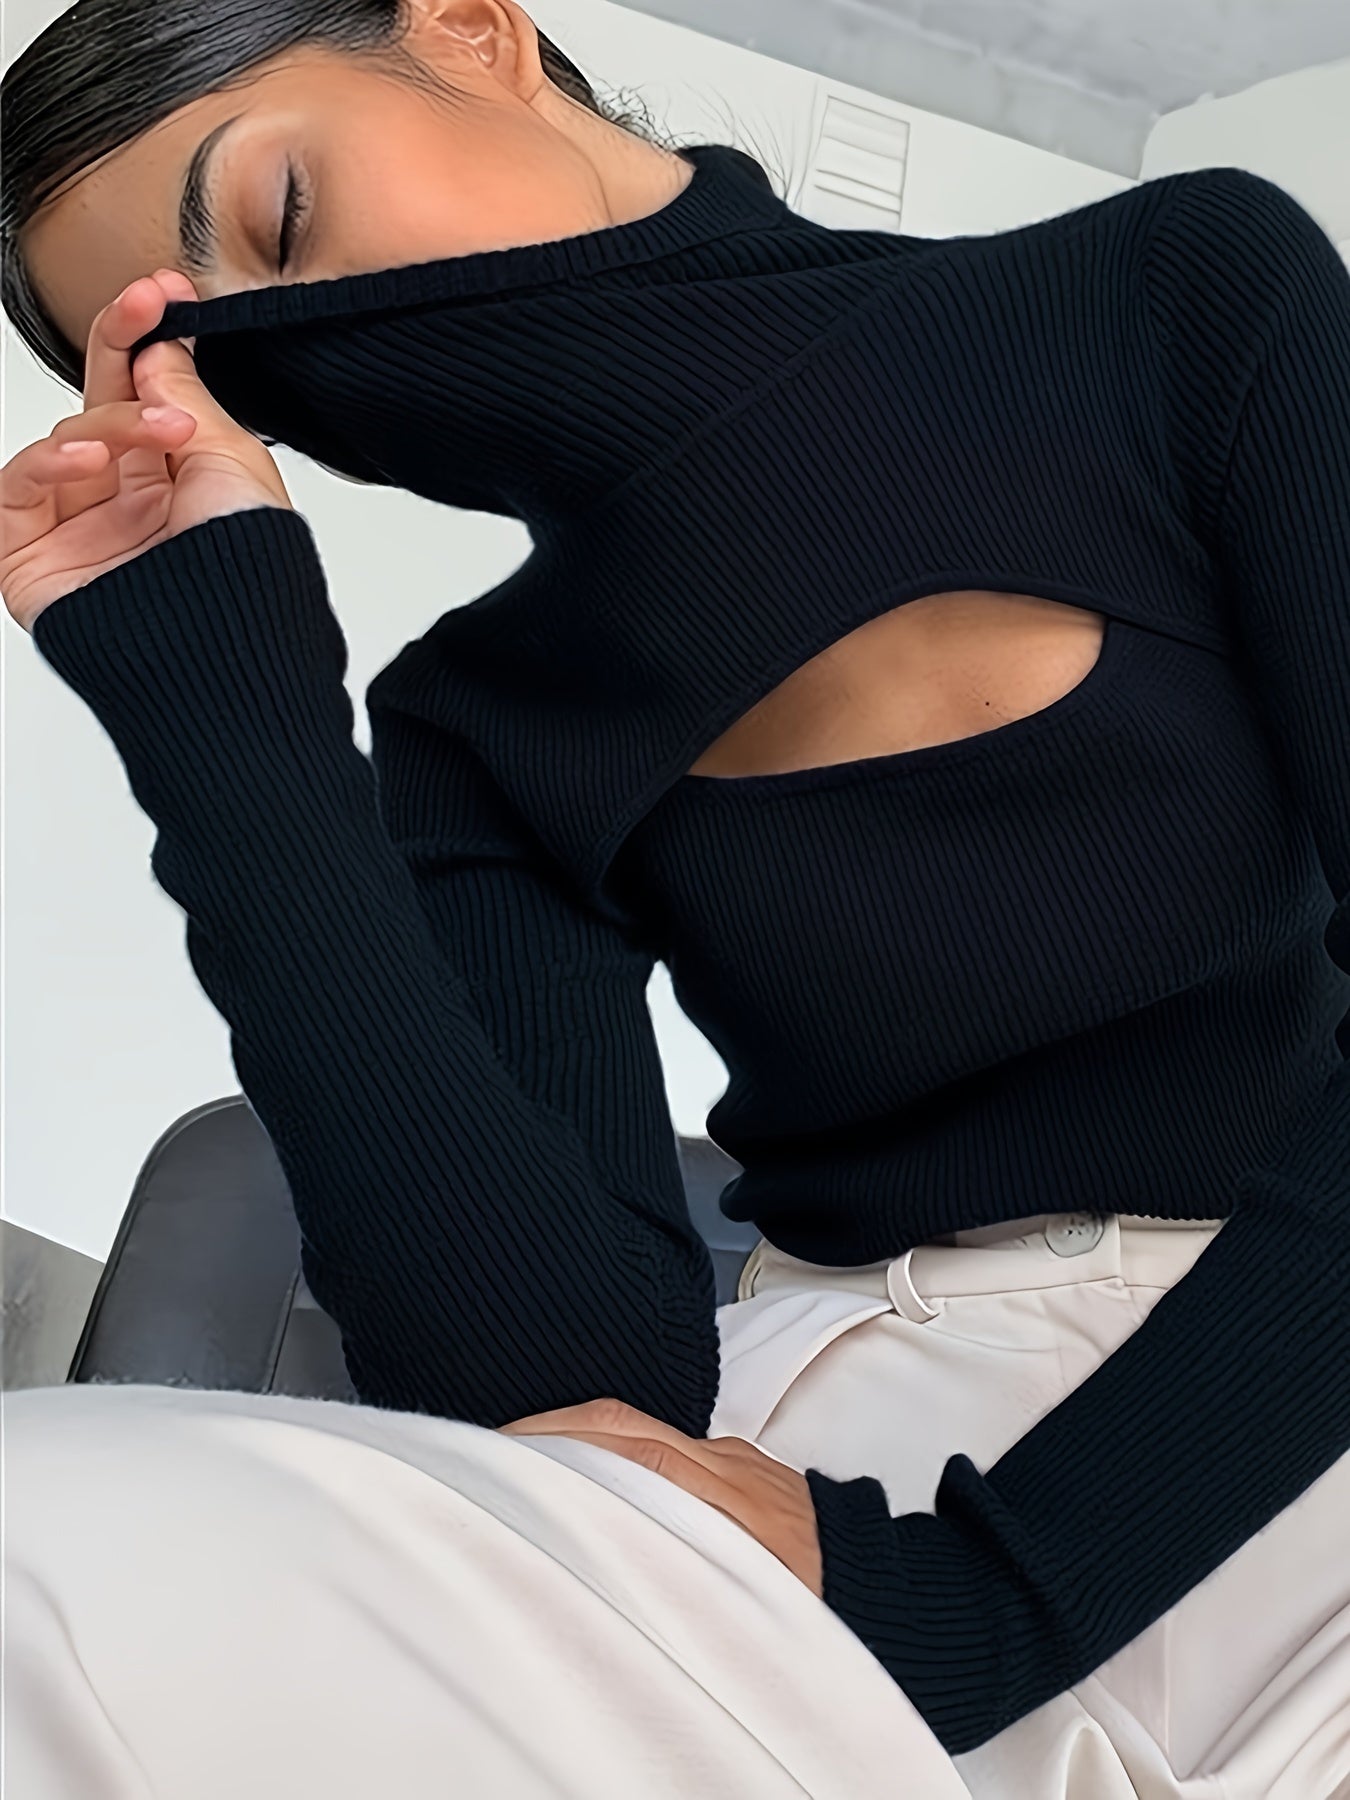 Antmvs Solid Turtle Neck Knitted Top, Casual Cut Out Long Sleeve Slim Sweater, Women's Clothing